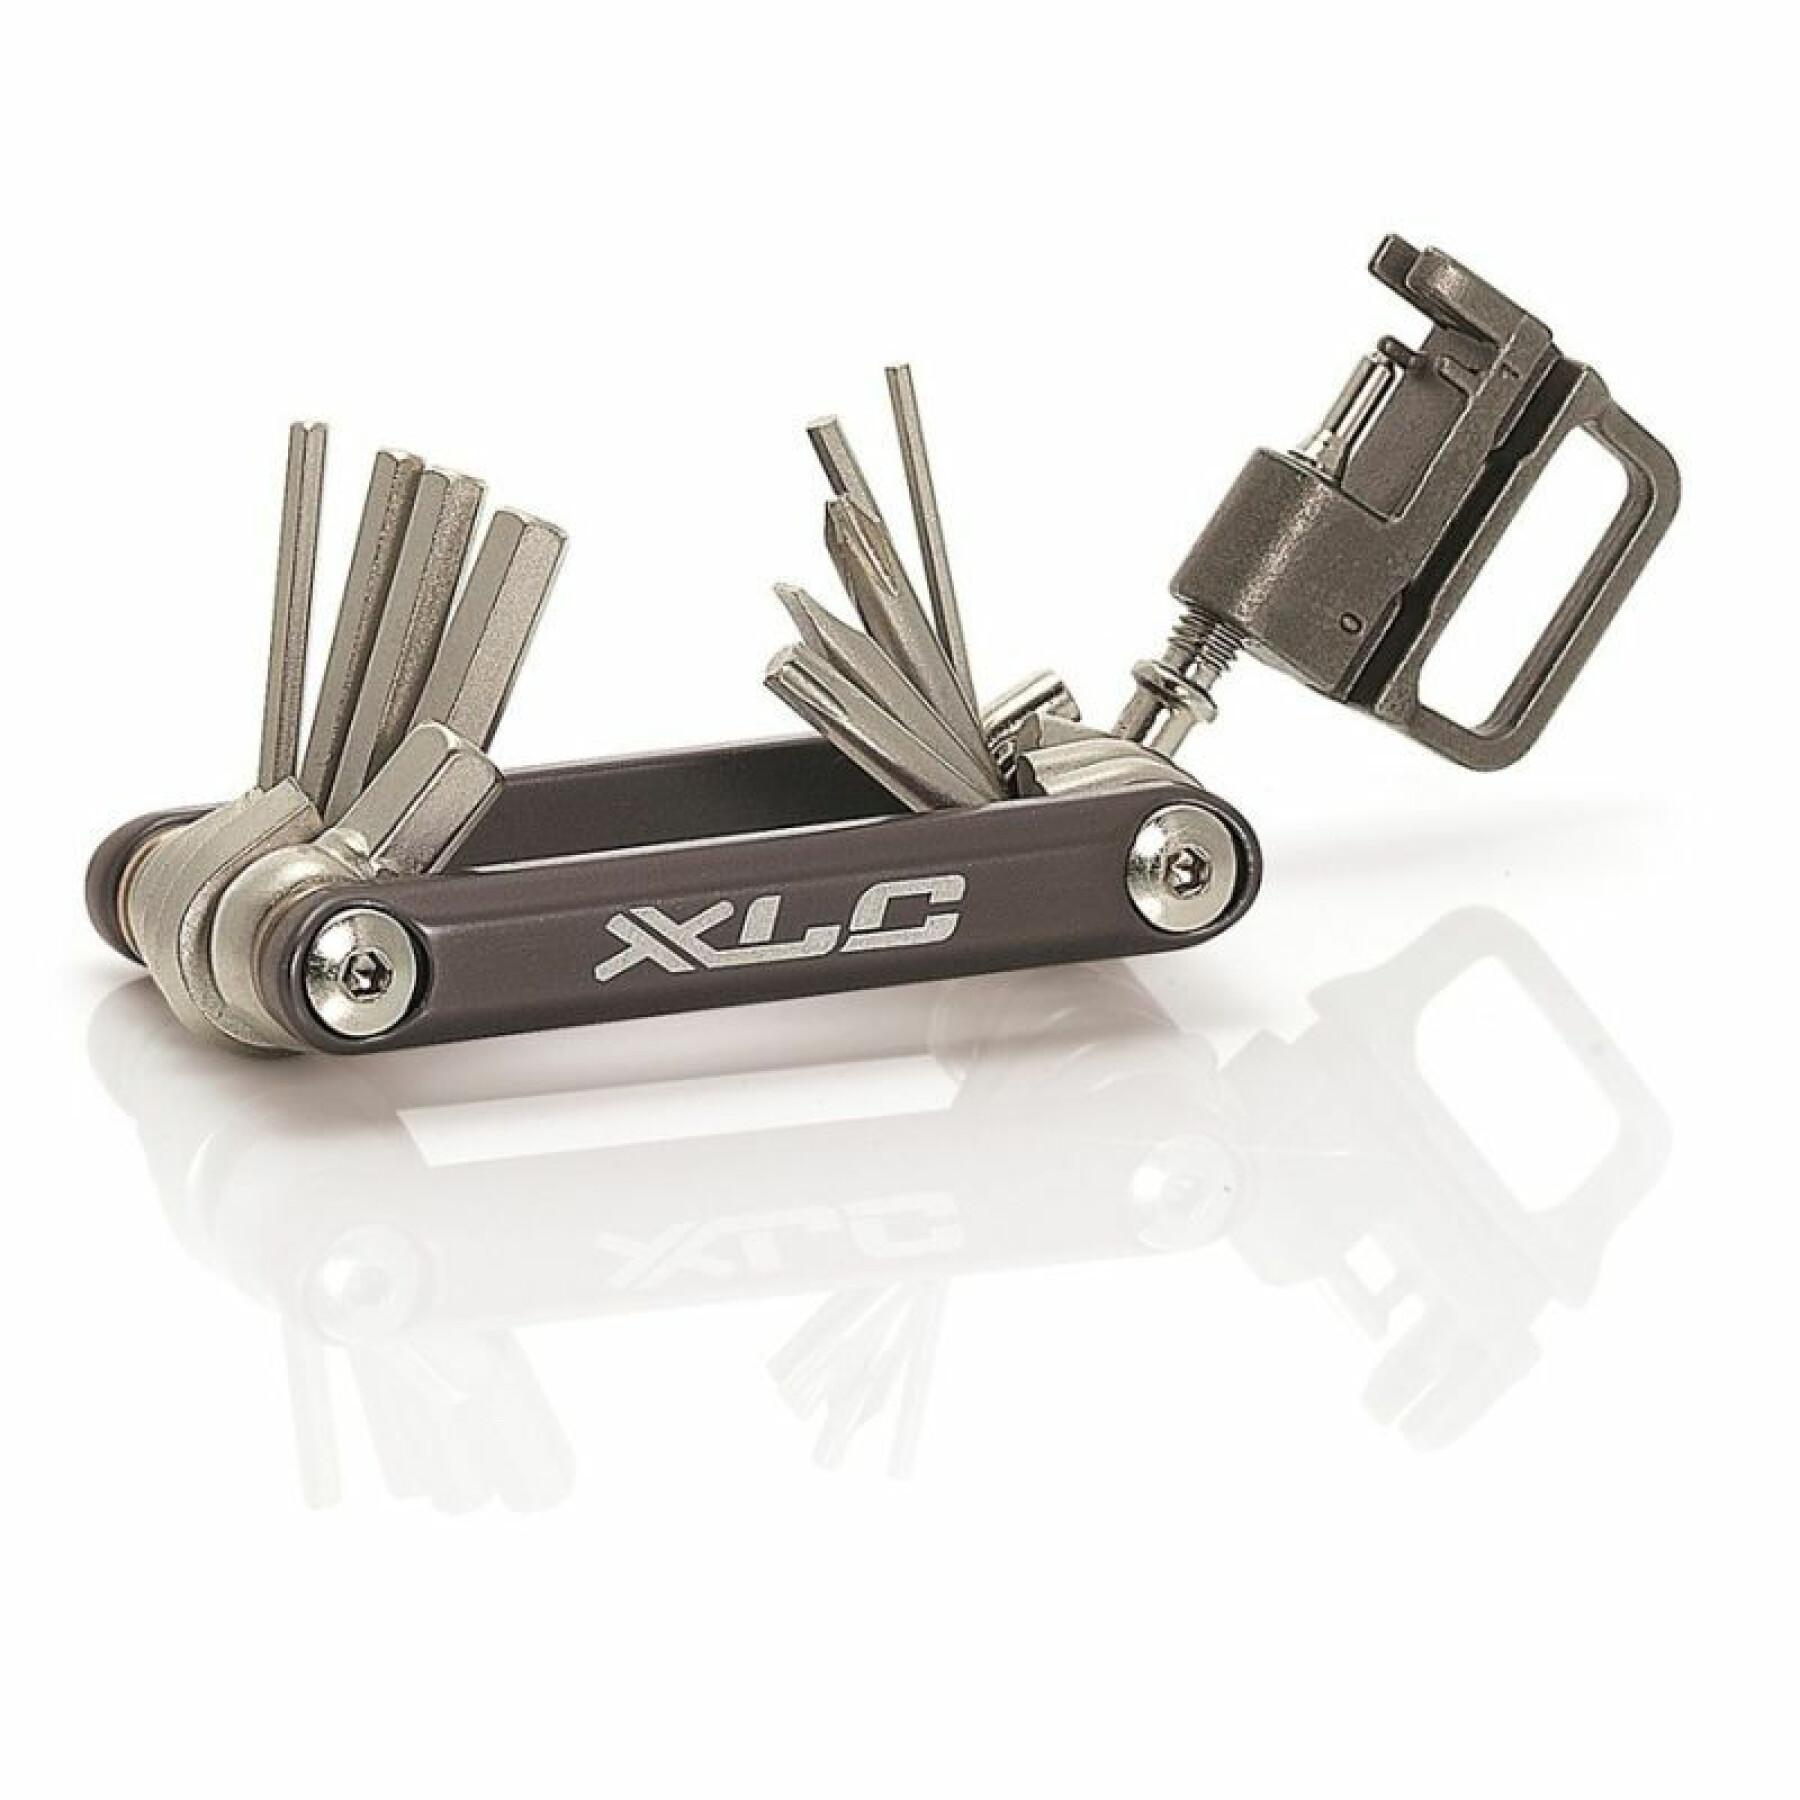 Multifunctional tool in key 15 functions allen and derive chain XLC TO-M07 Torx T25